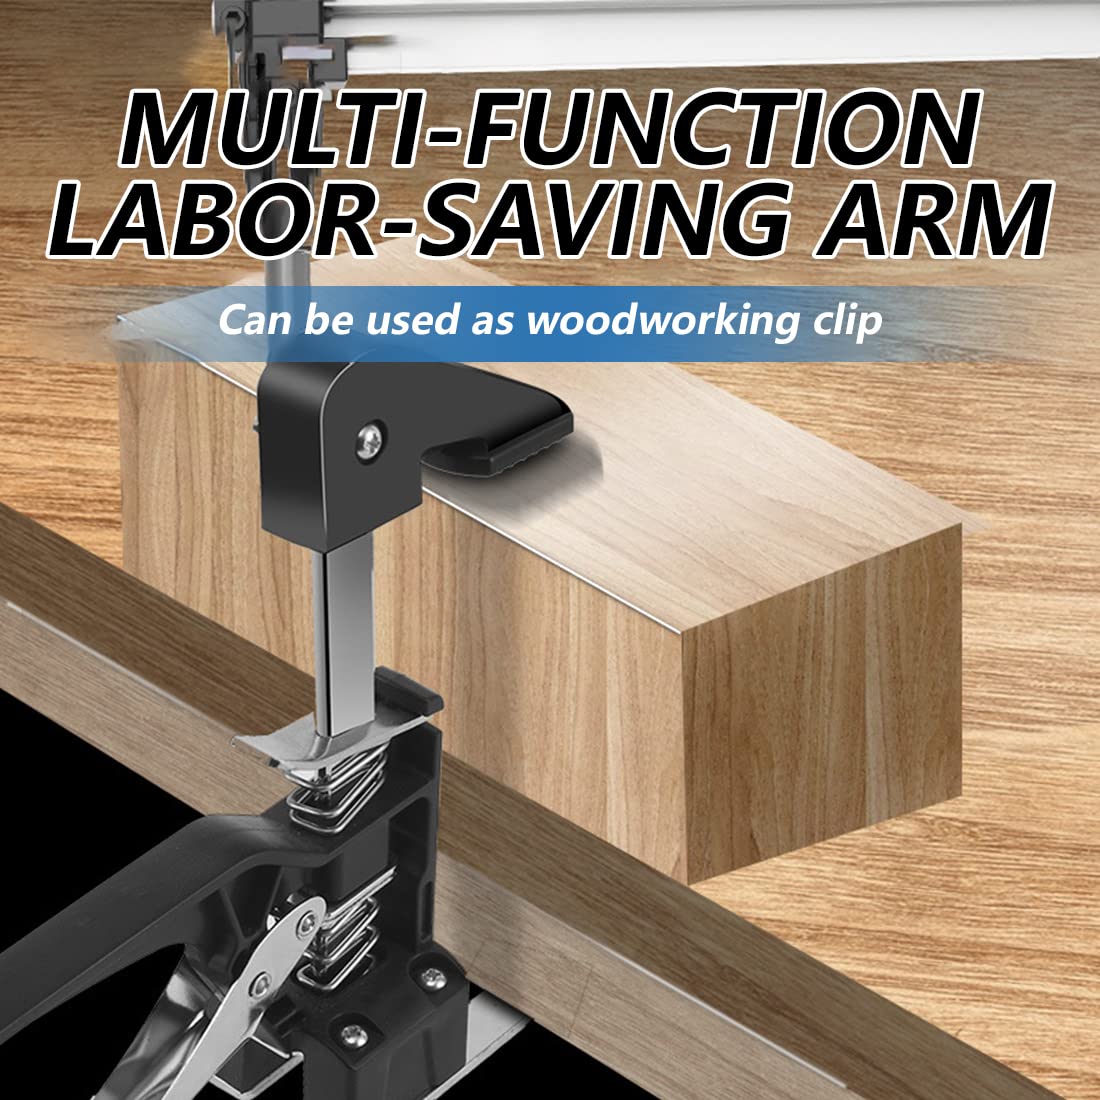 Effortlessly Improve Your Daily Life with the Labor-Saving Arm - Get Yours Today!